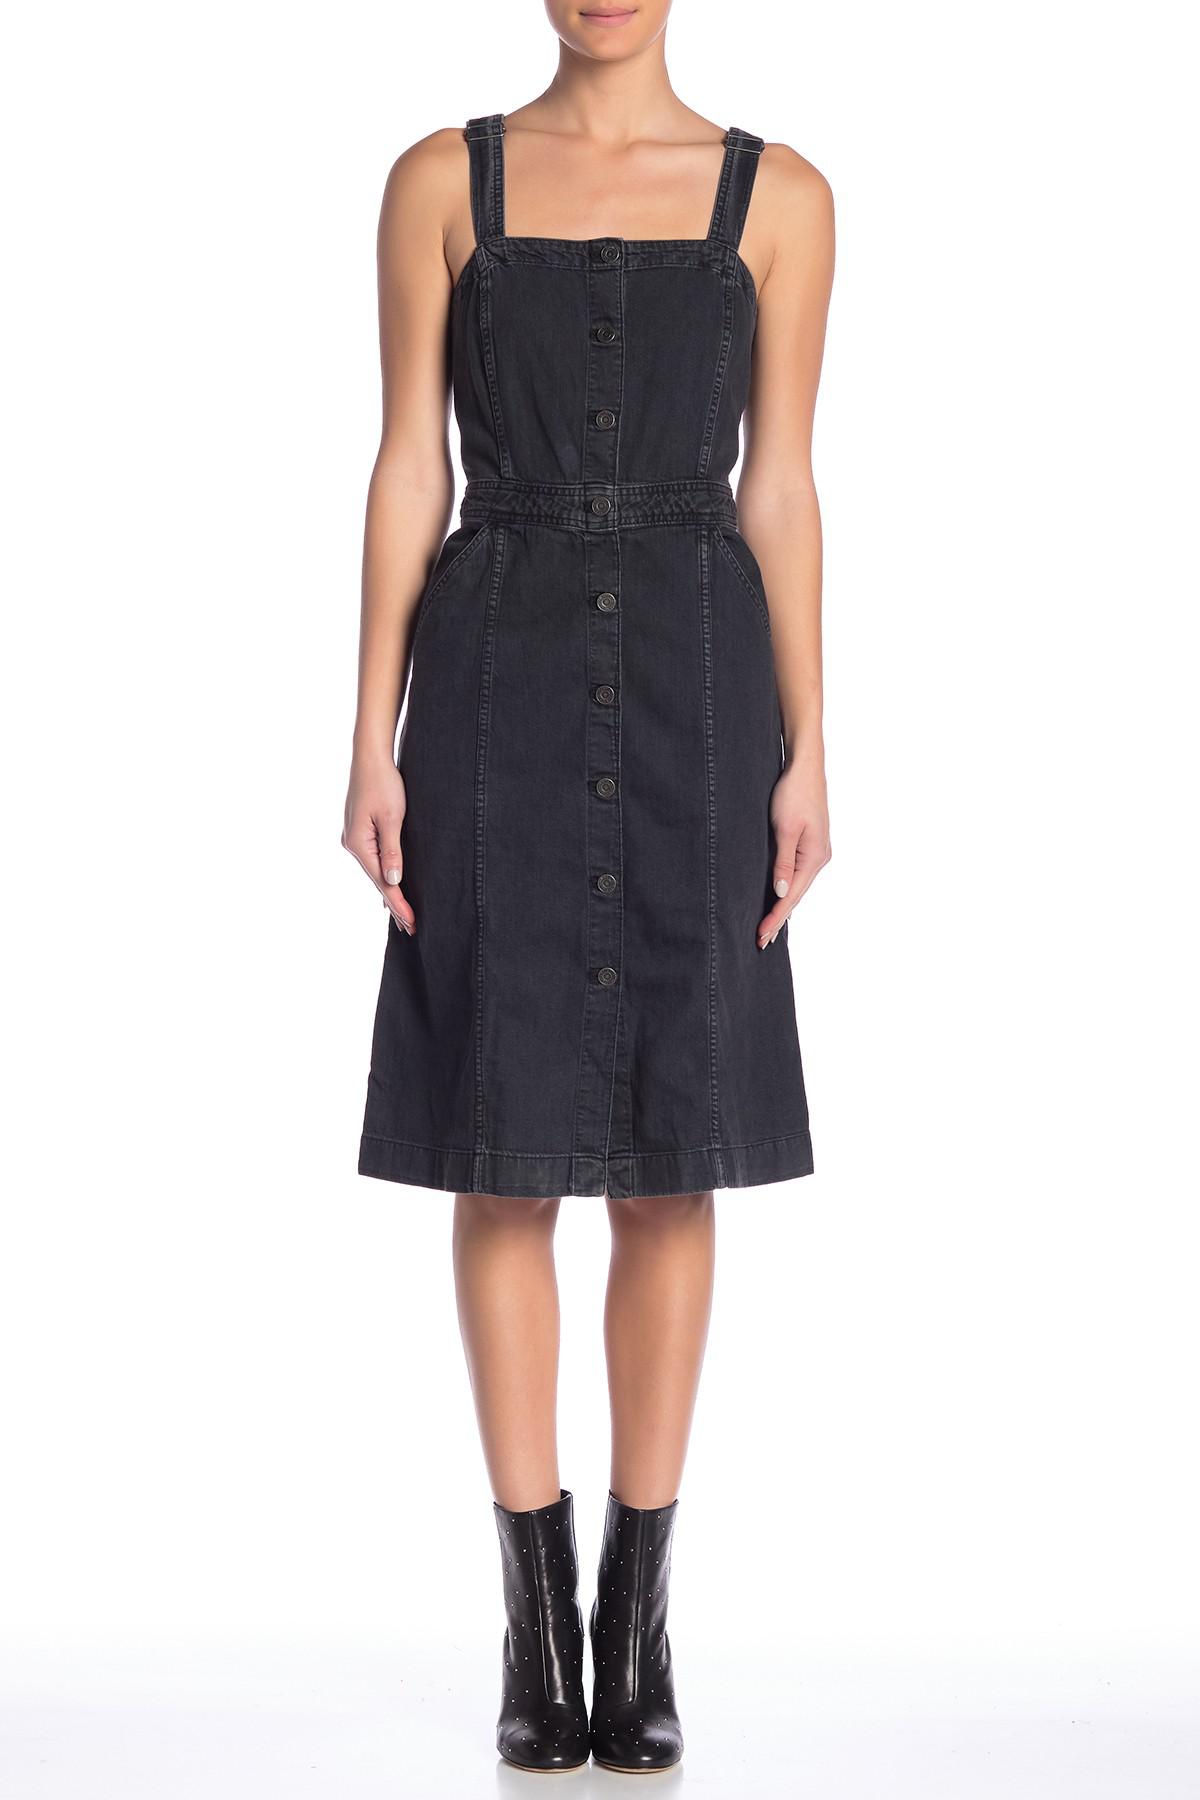 Cherie Overall Styled Dress 